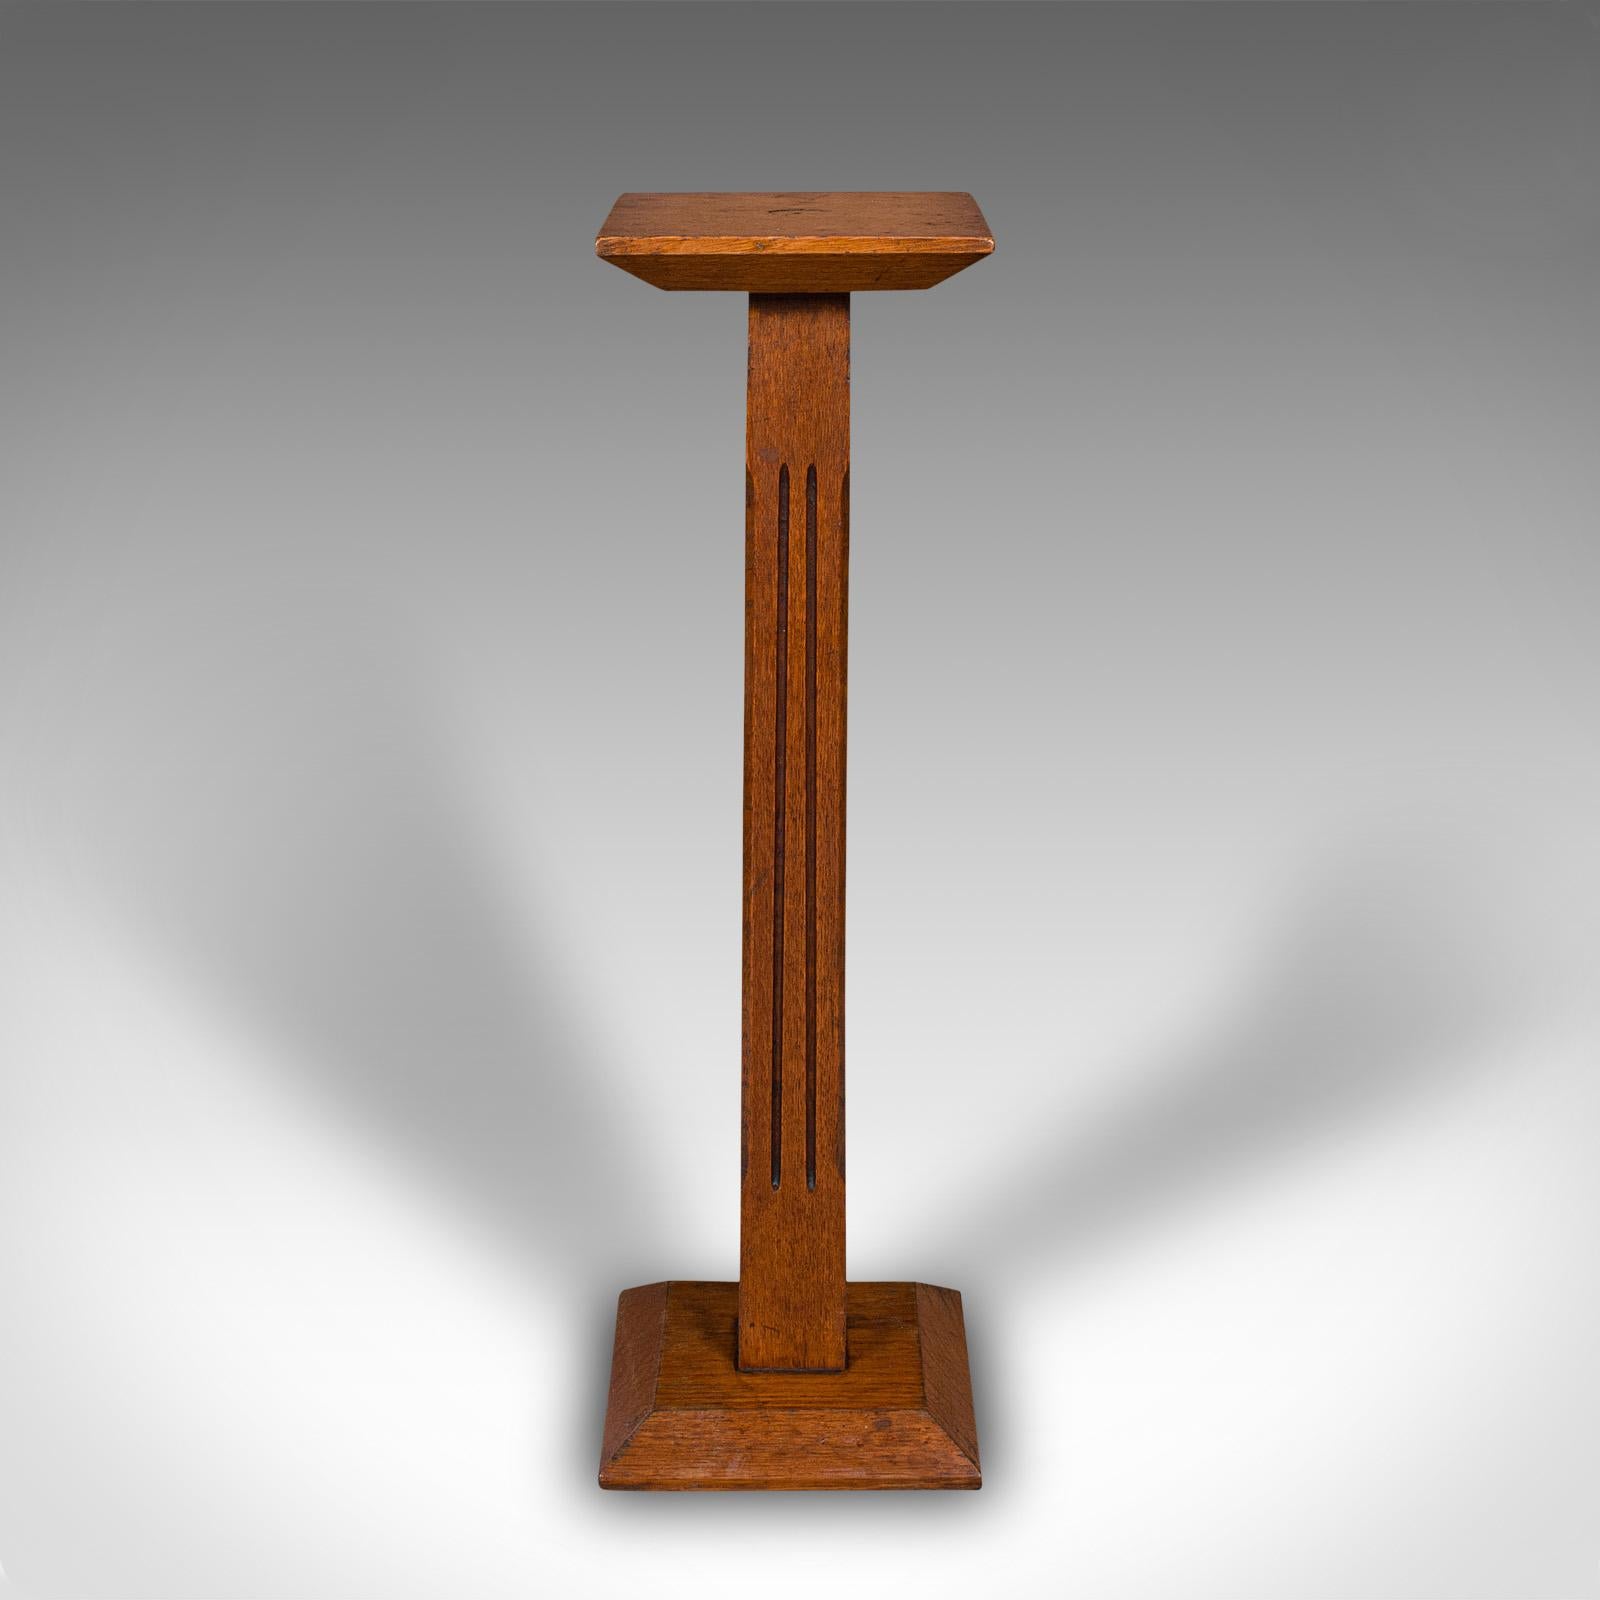 This is an antique portrait bust stand. An English, oak jardiniere or torchere column, dating to the Victorian period, circa 1880.

Attractive antique stand, ideal for hosting a portrait bust or figure.
Displaying a desirable aged patina and in